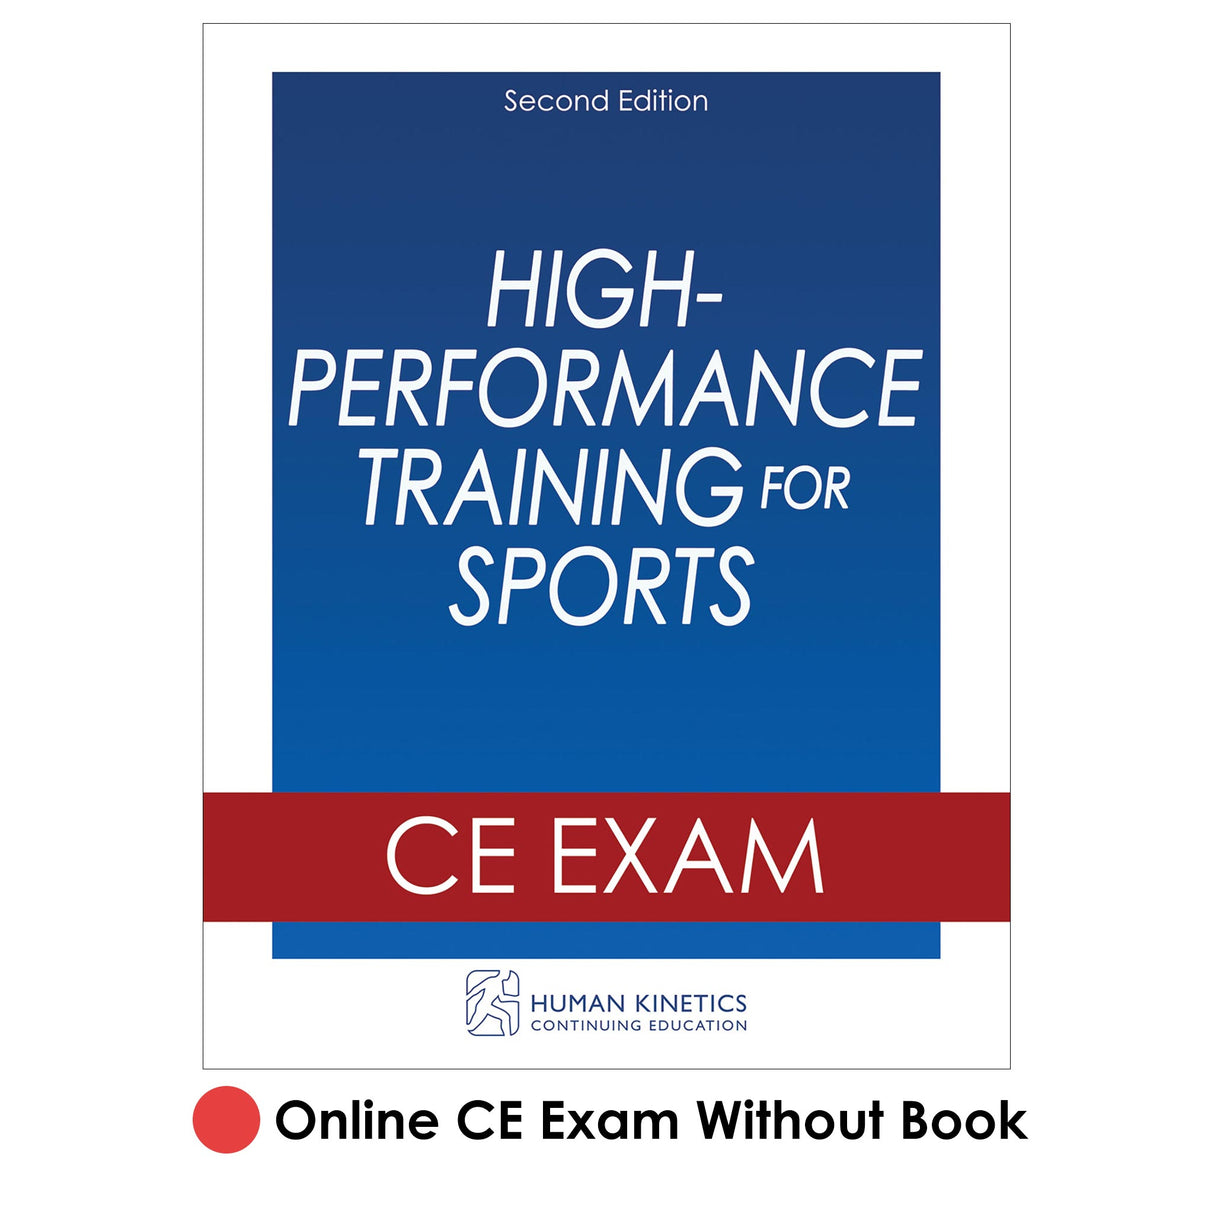 High-Performance Training for Sports 2nd Edition Online CE Exam Without Book